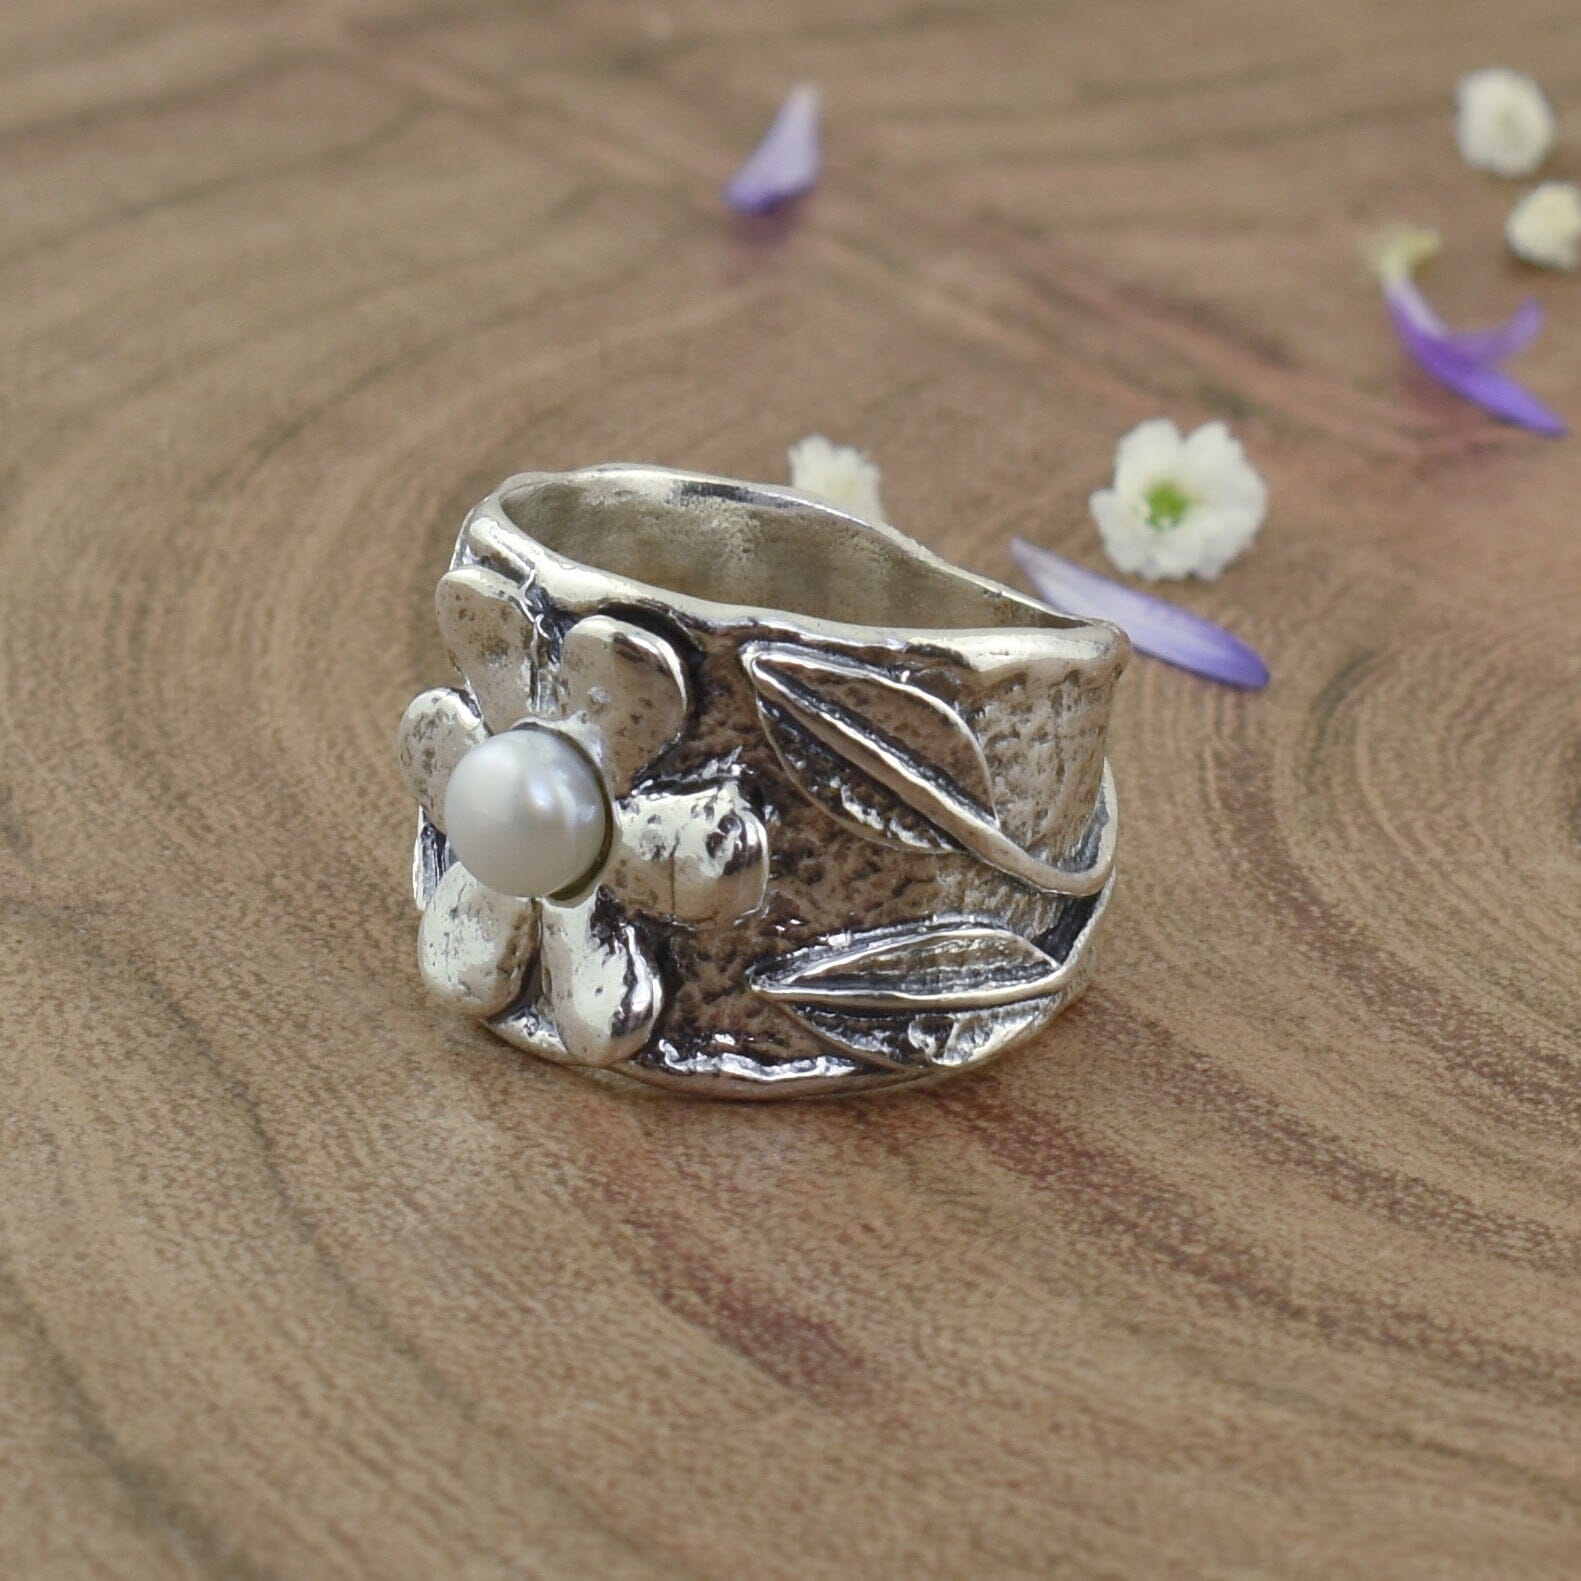 flower ring with a freshwater pearl in the center - Forget Me Not 